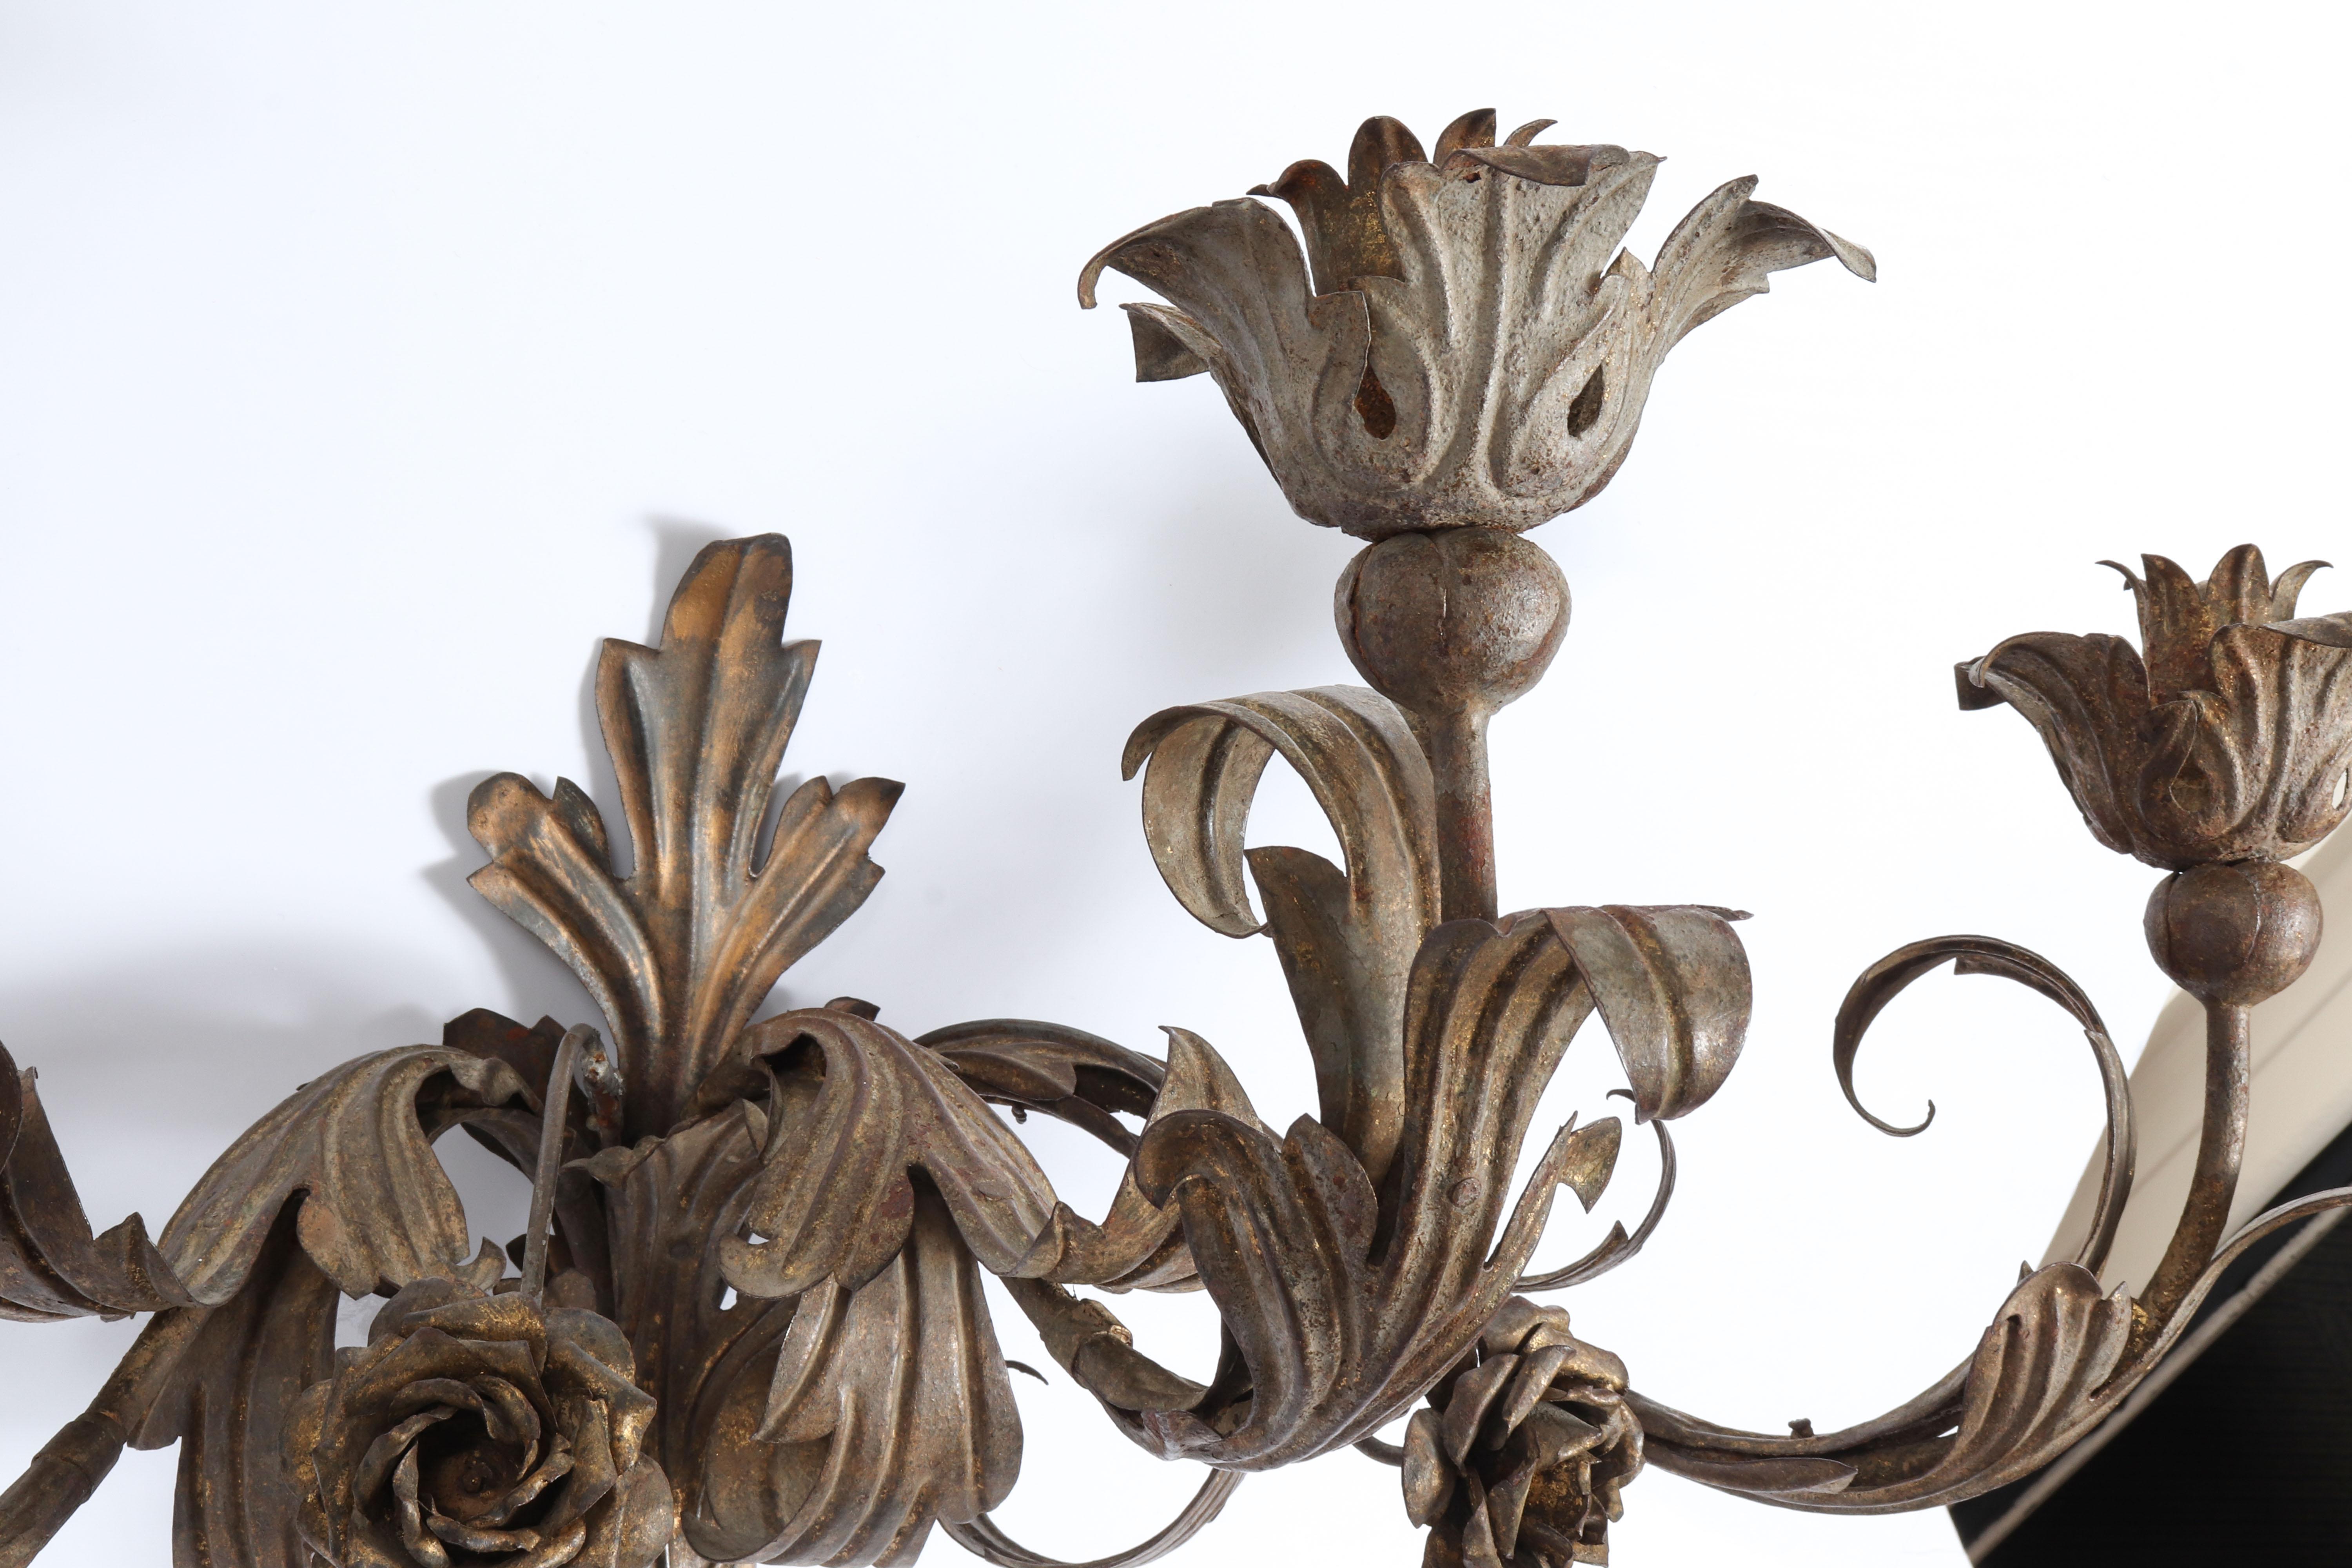 Hollywood Regency pair of wall sconces made in gilt metal. The pair is made with decorative roses and foliage and can fit three candles each. In great vintage condition with age-appropriate wear and use.

Dealer: S138XX